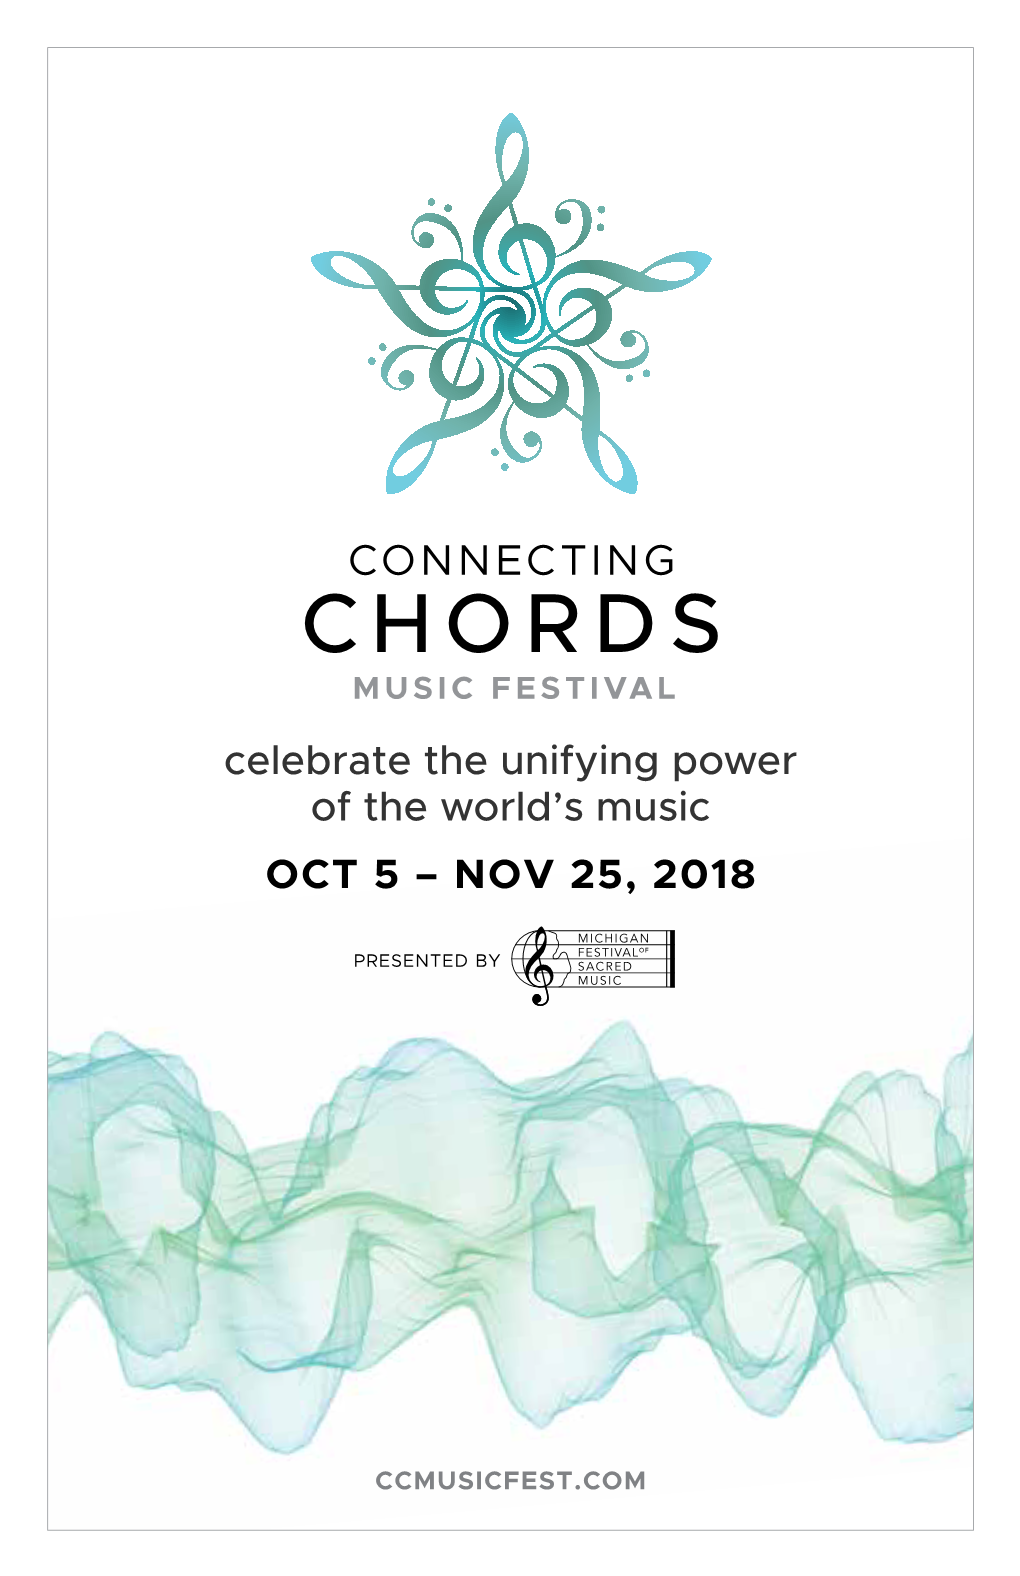 OCT 5 – NOV 25, 2018 Celebrate the Unifying Power of the World's Music